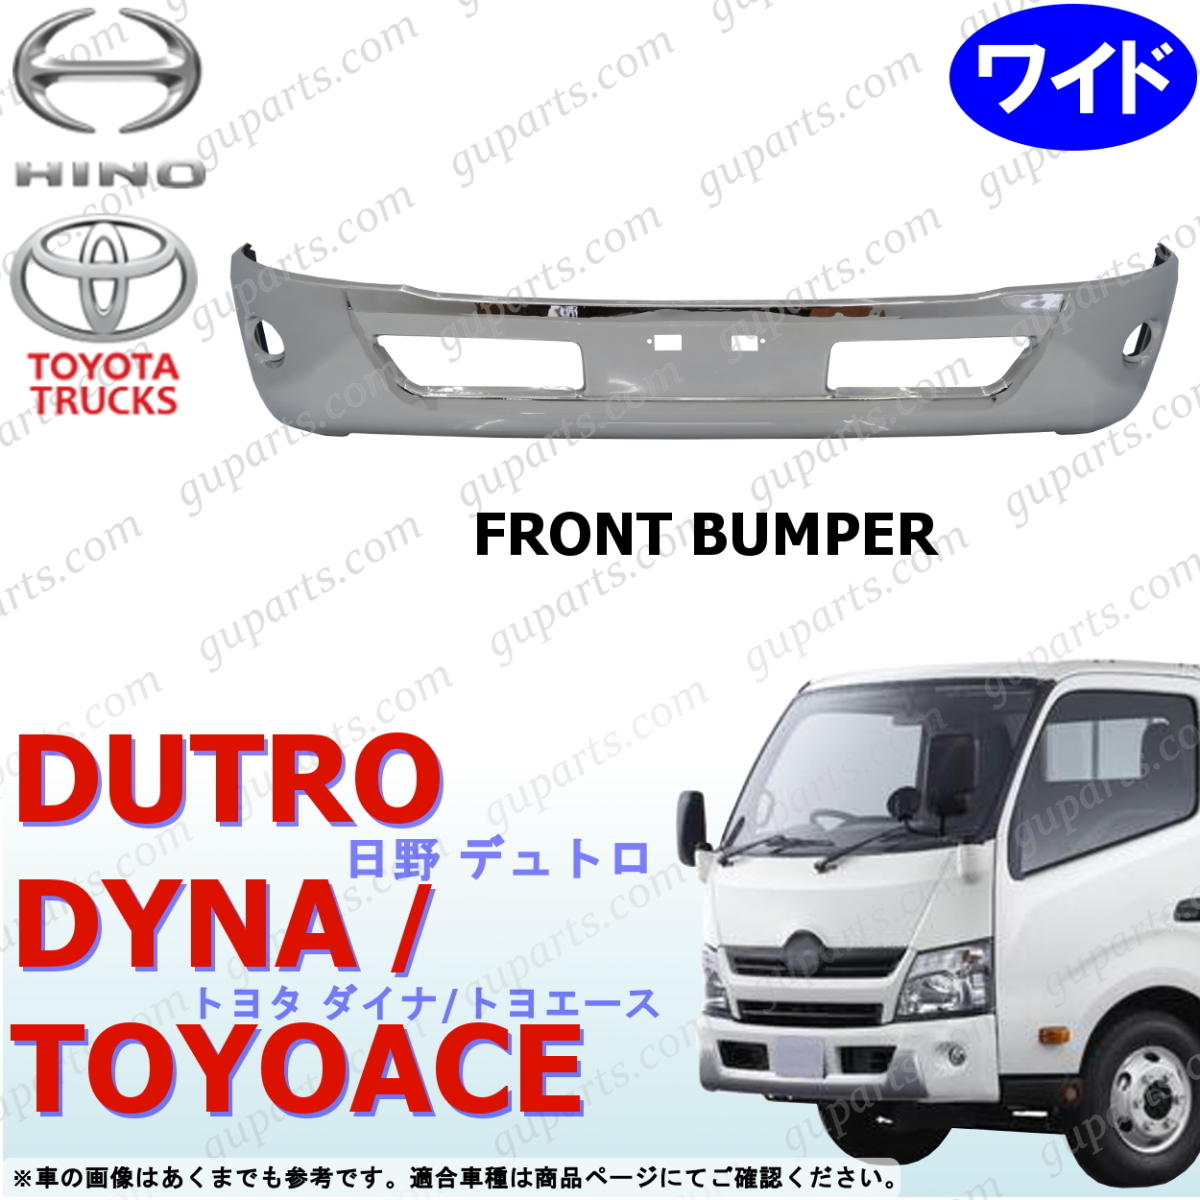  Hino Dutro Toyota Dyna Toyoace wide H23~H28 front bumper chrome plating DUTRO air loop 